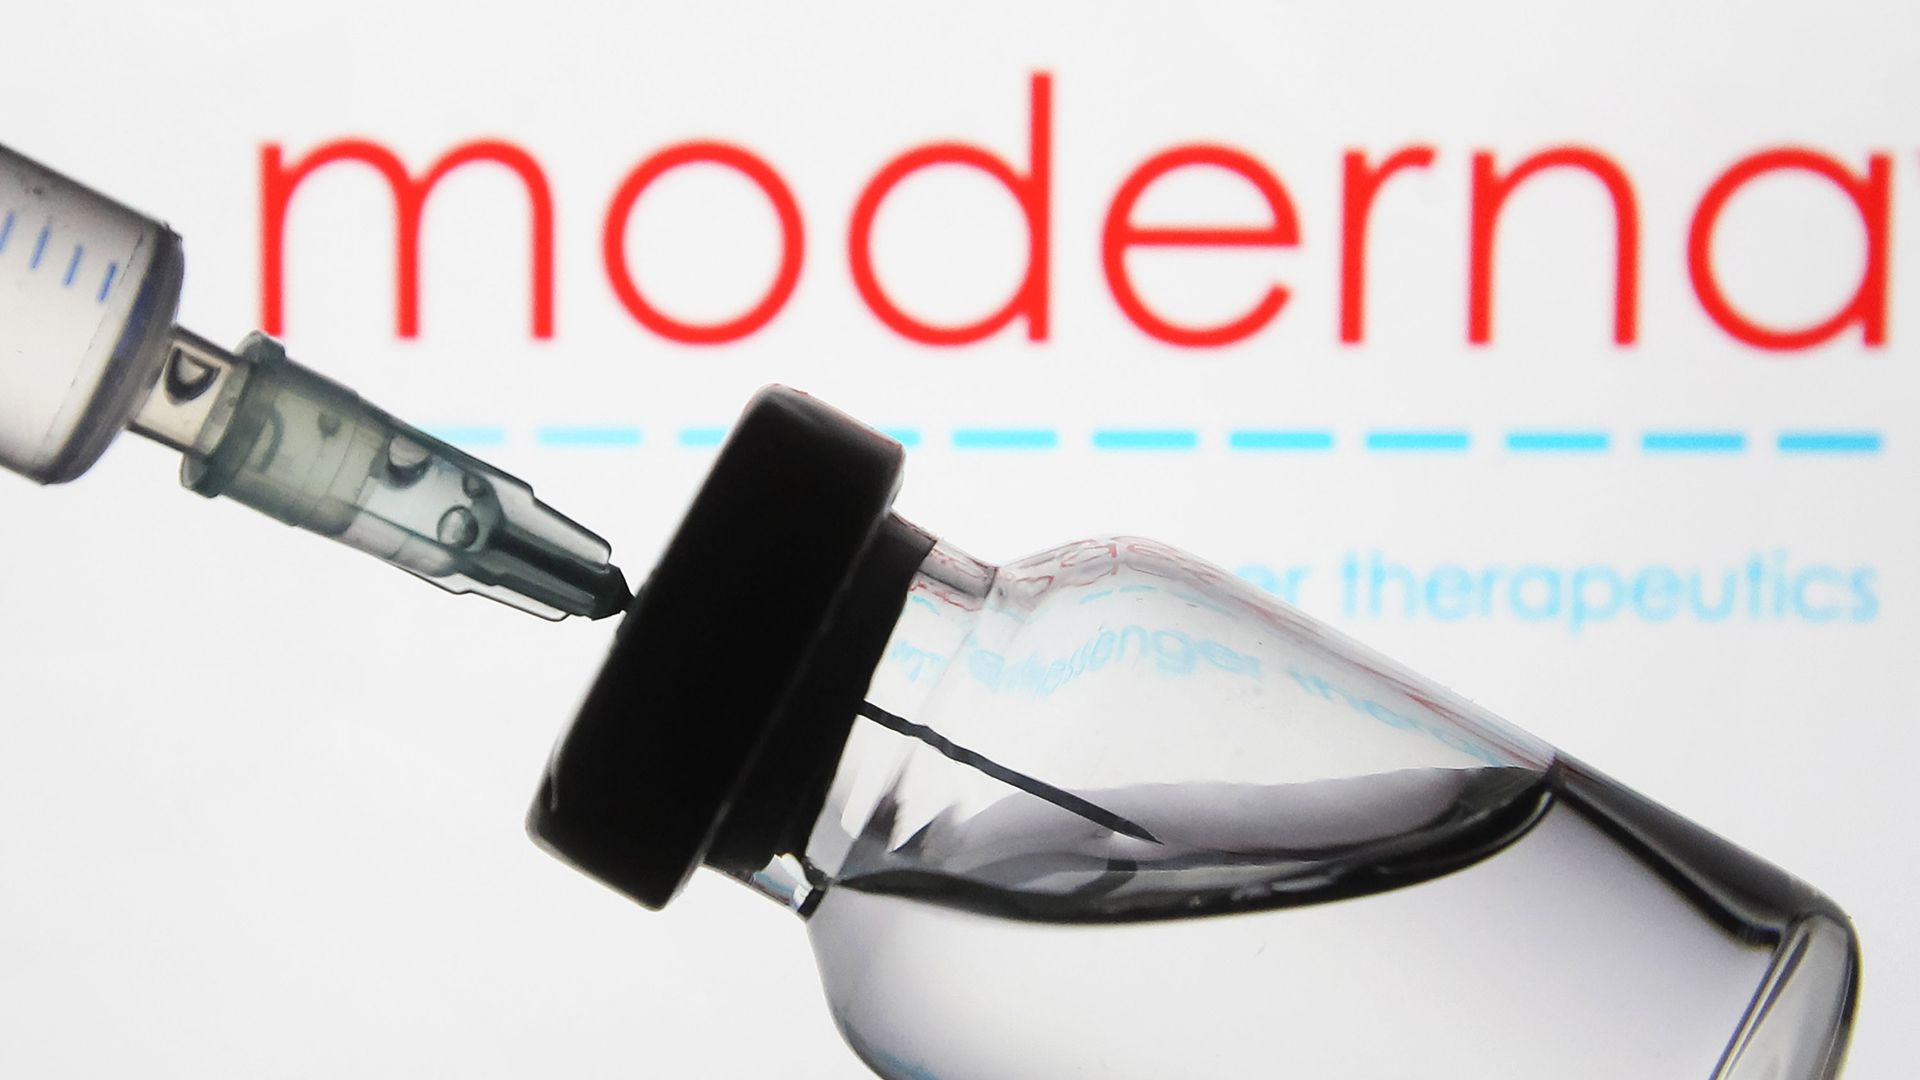 A medical syringe and a vial in front of the Moderna logo